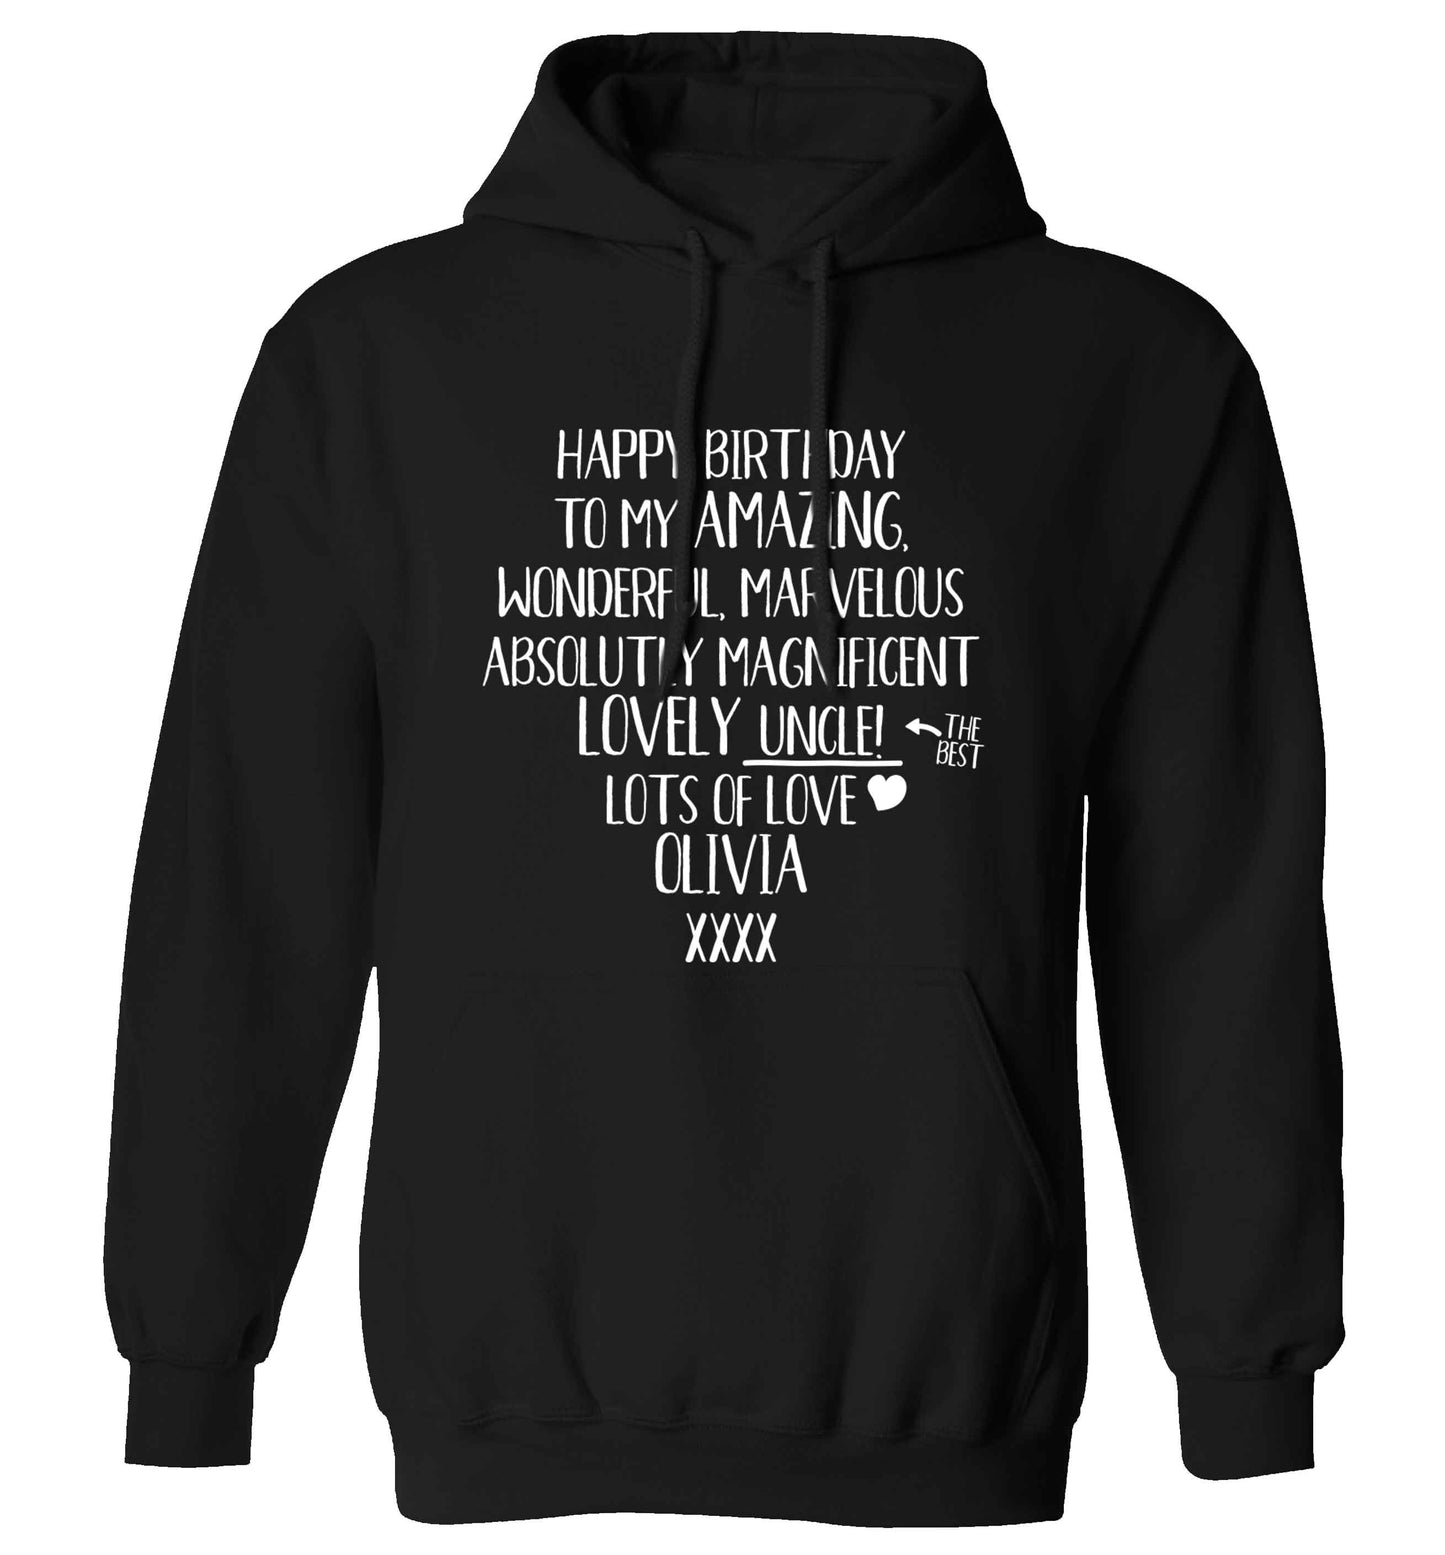 Personalised happy birthday to my amazing, wonderful, lovely uncle adults unisex black hoodie 2XL